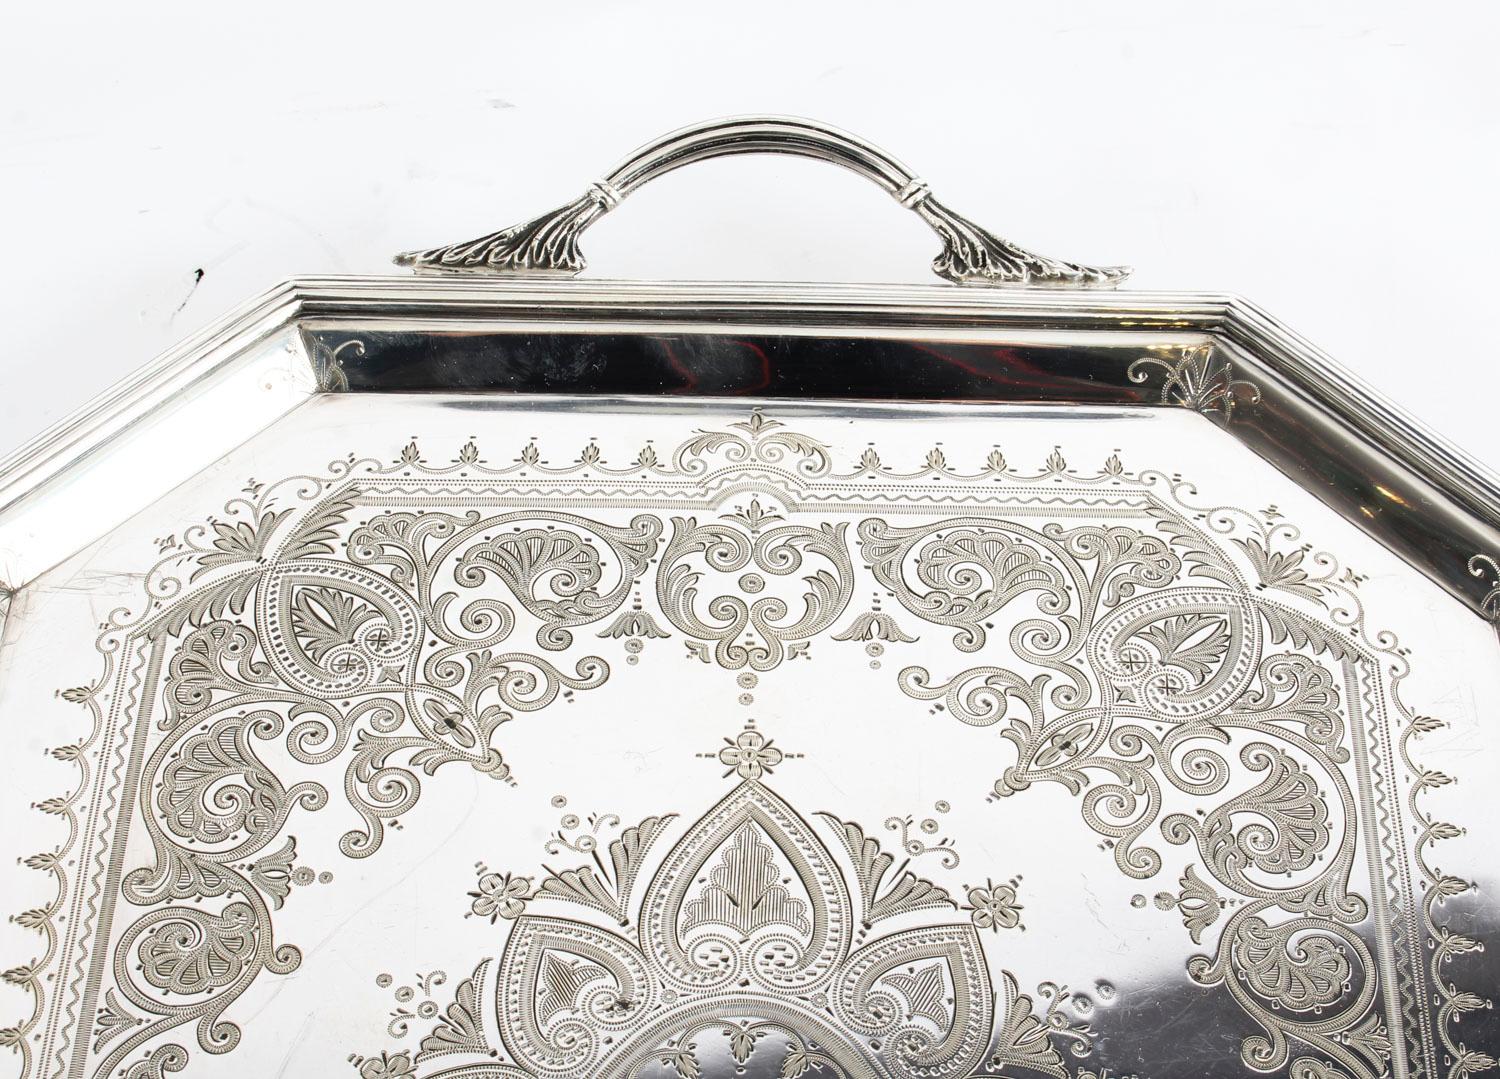 English Antique Victorian Silver Plated Service Tray Thomas Latham, 19th Century